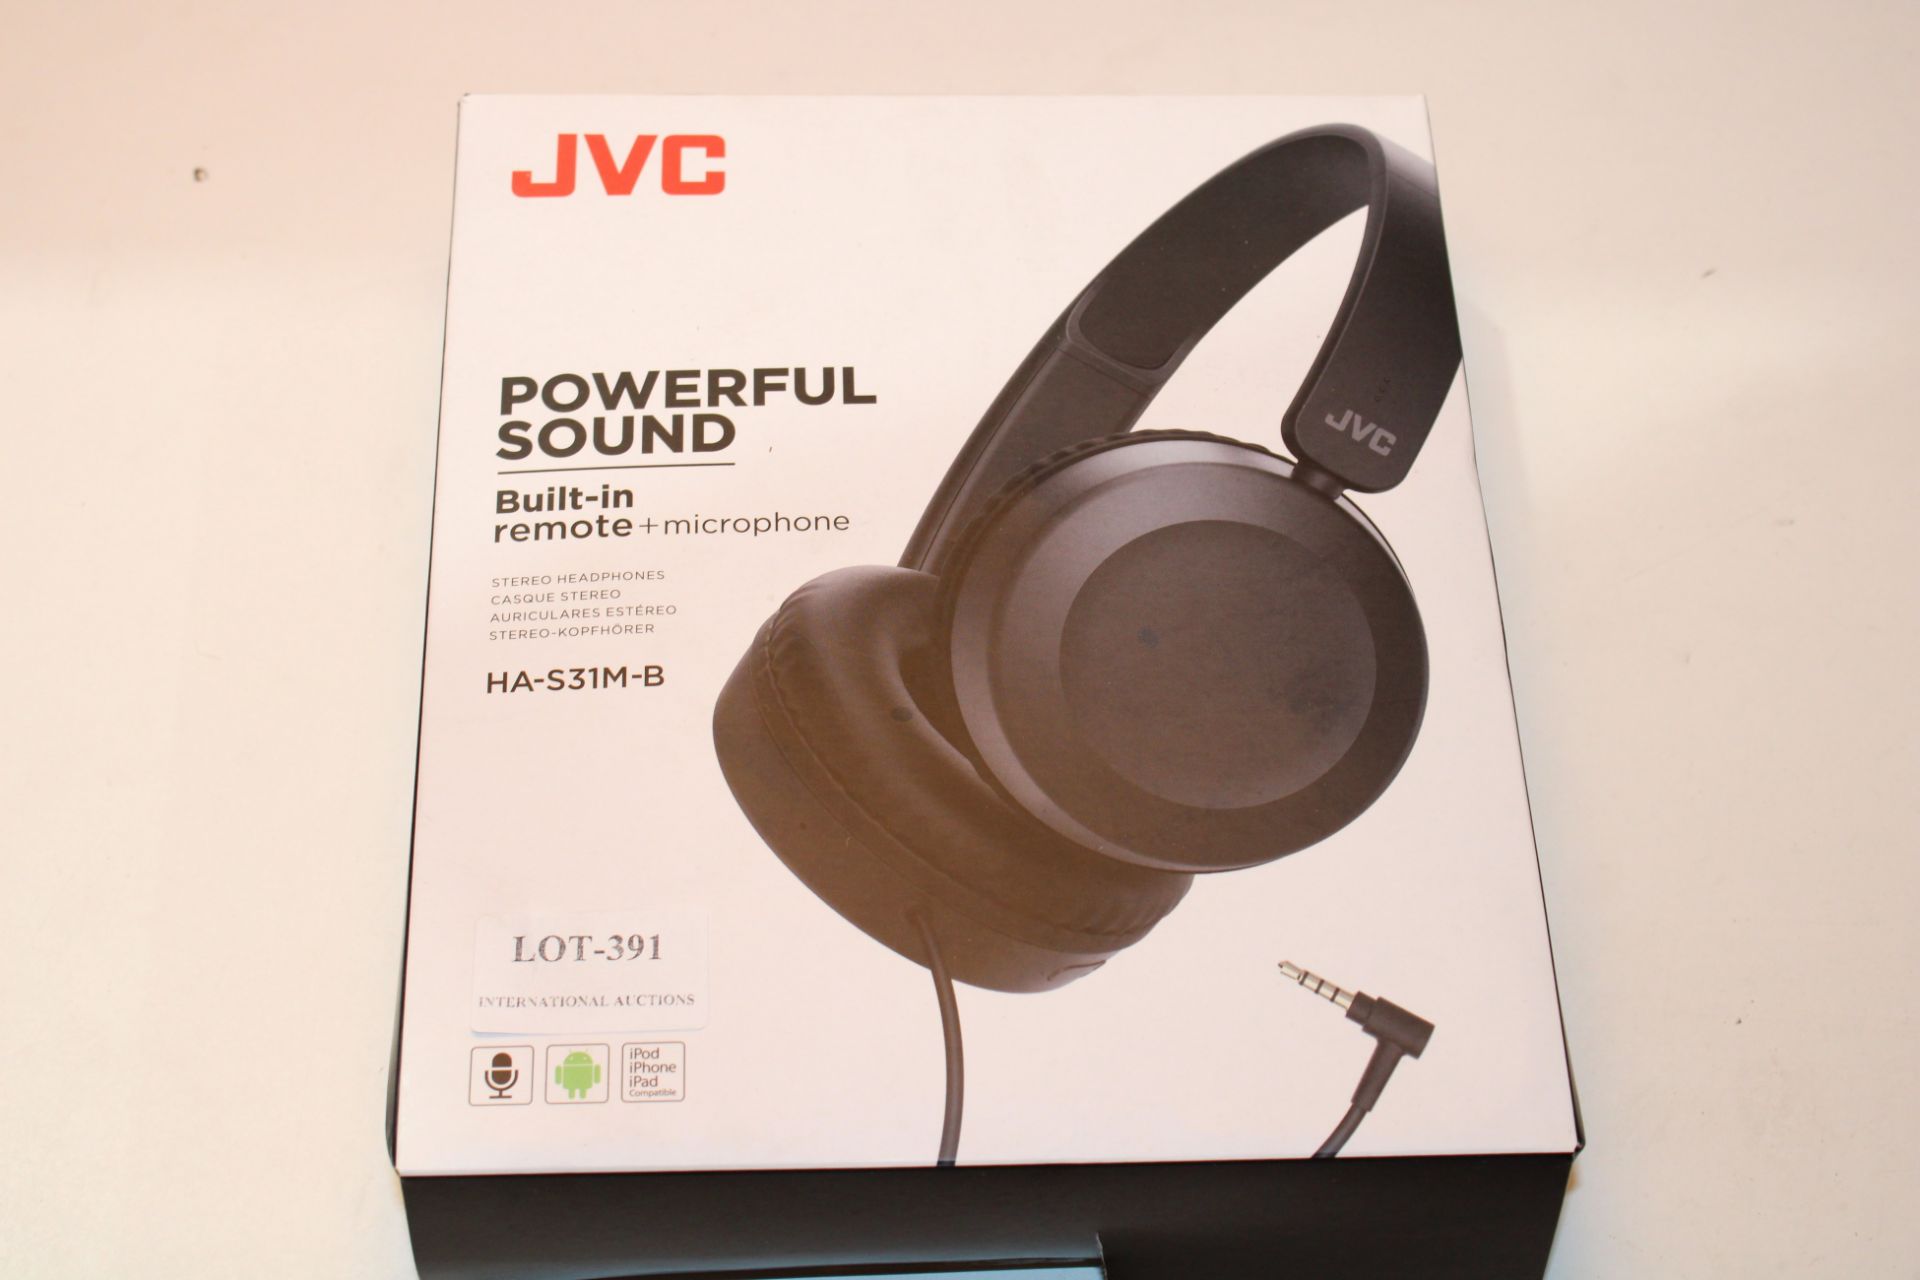 JVC Foldable Lightweight HA-S31M On-Ear Headphones with Built-In Remote, Microphone and Call